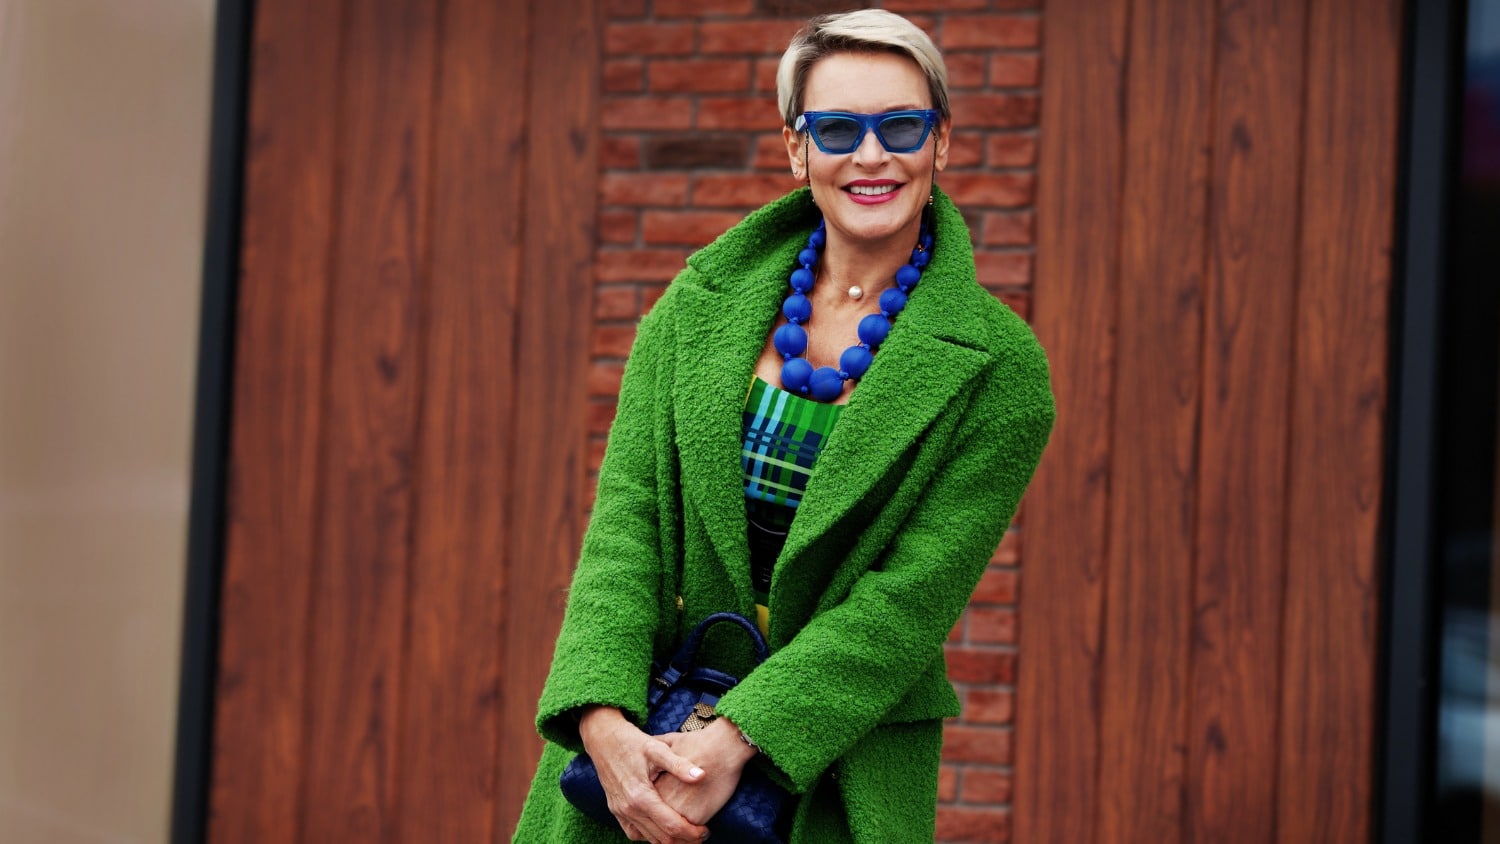 Fashion Over 50: Our 25 Favorite Fashion Bloggers You Should